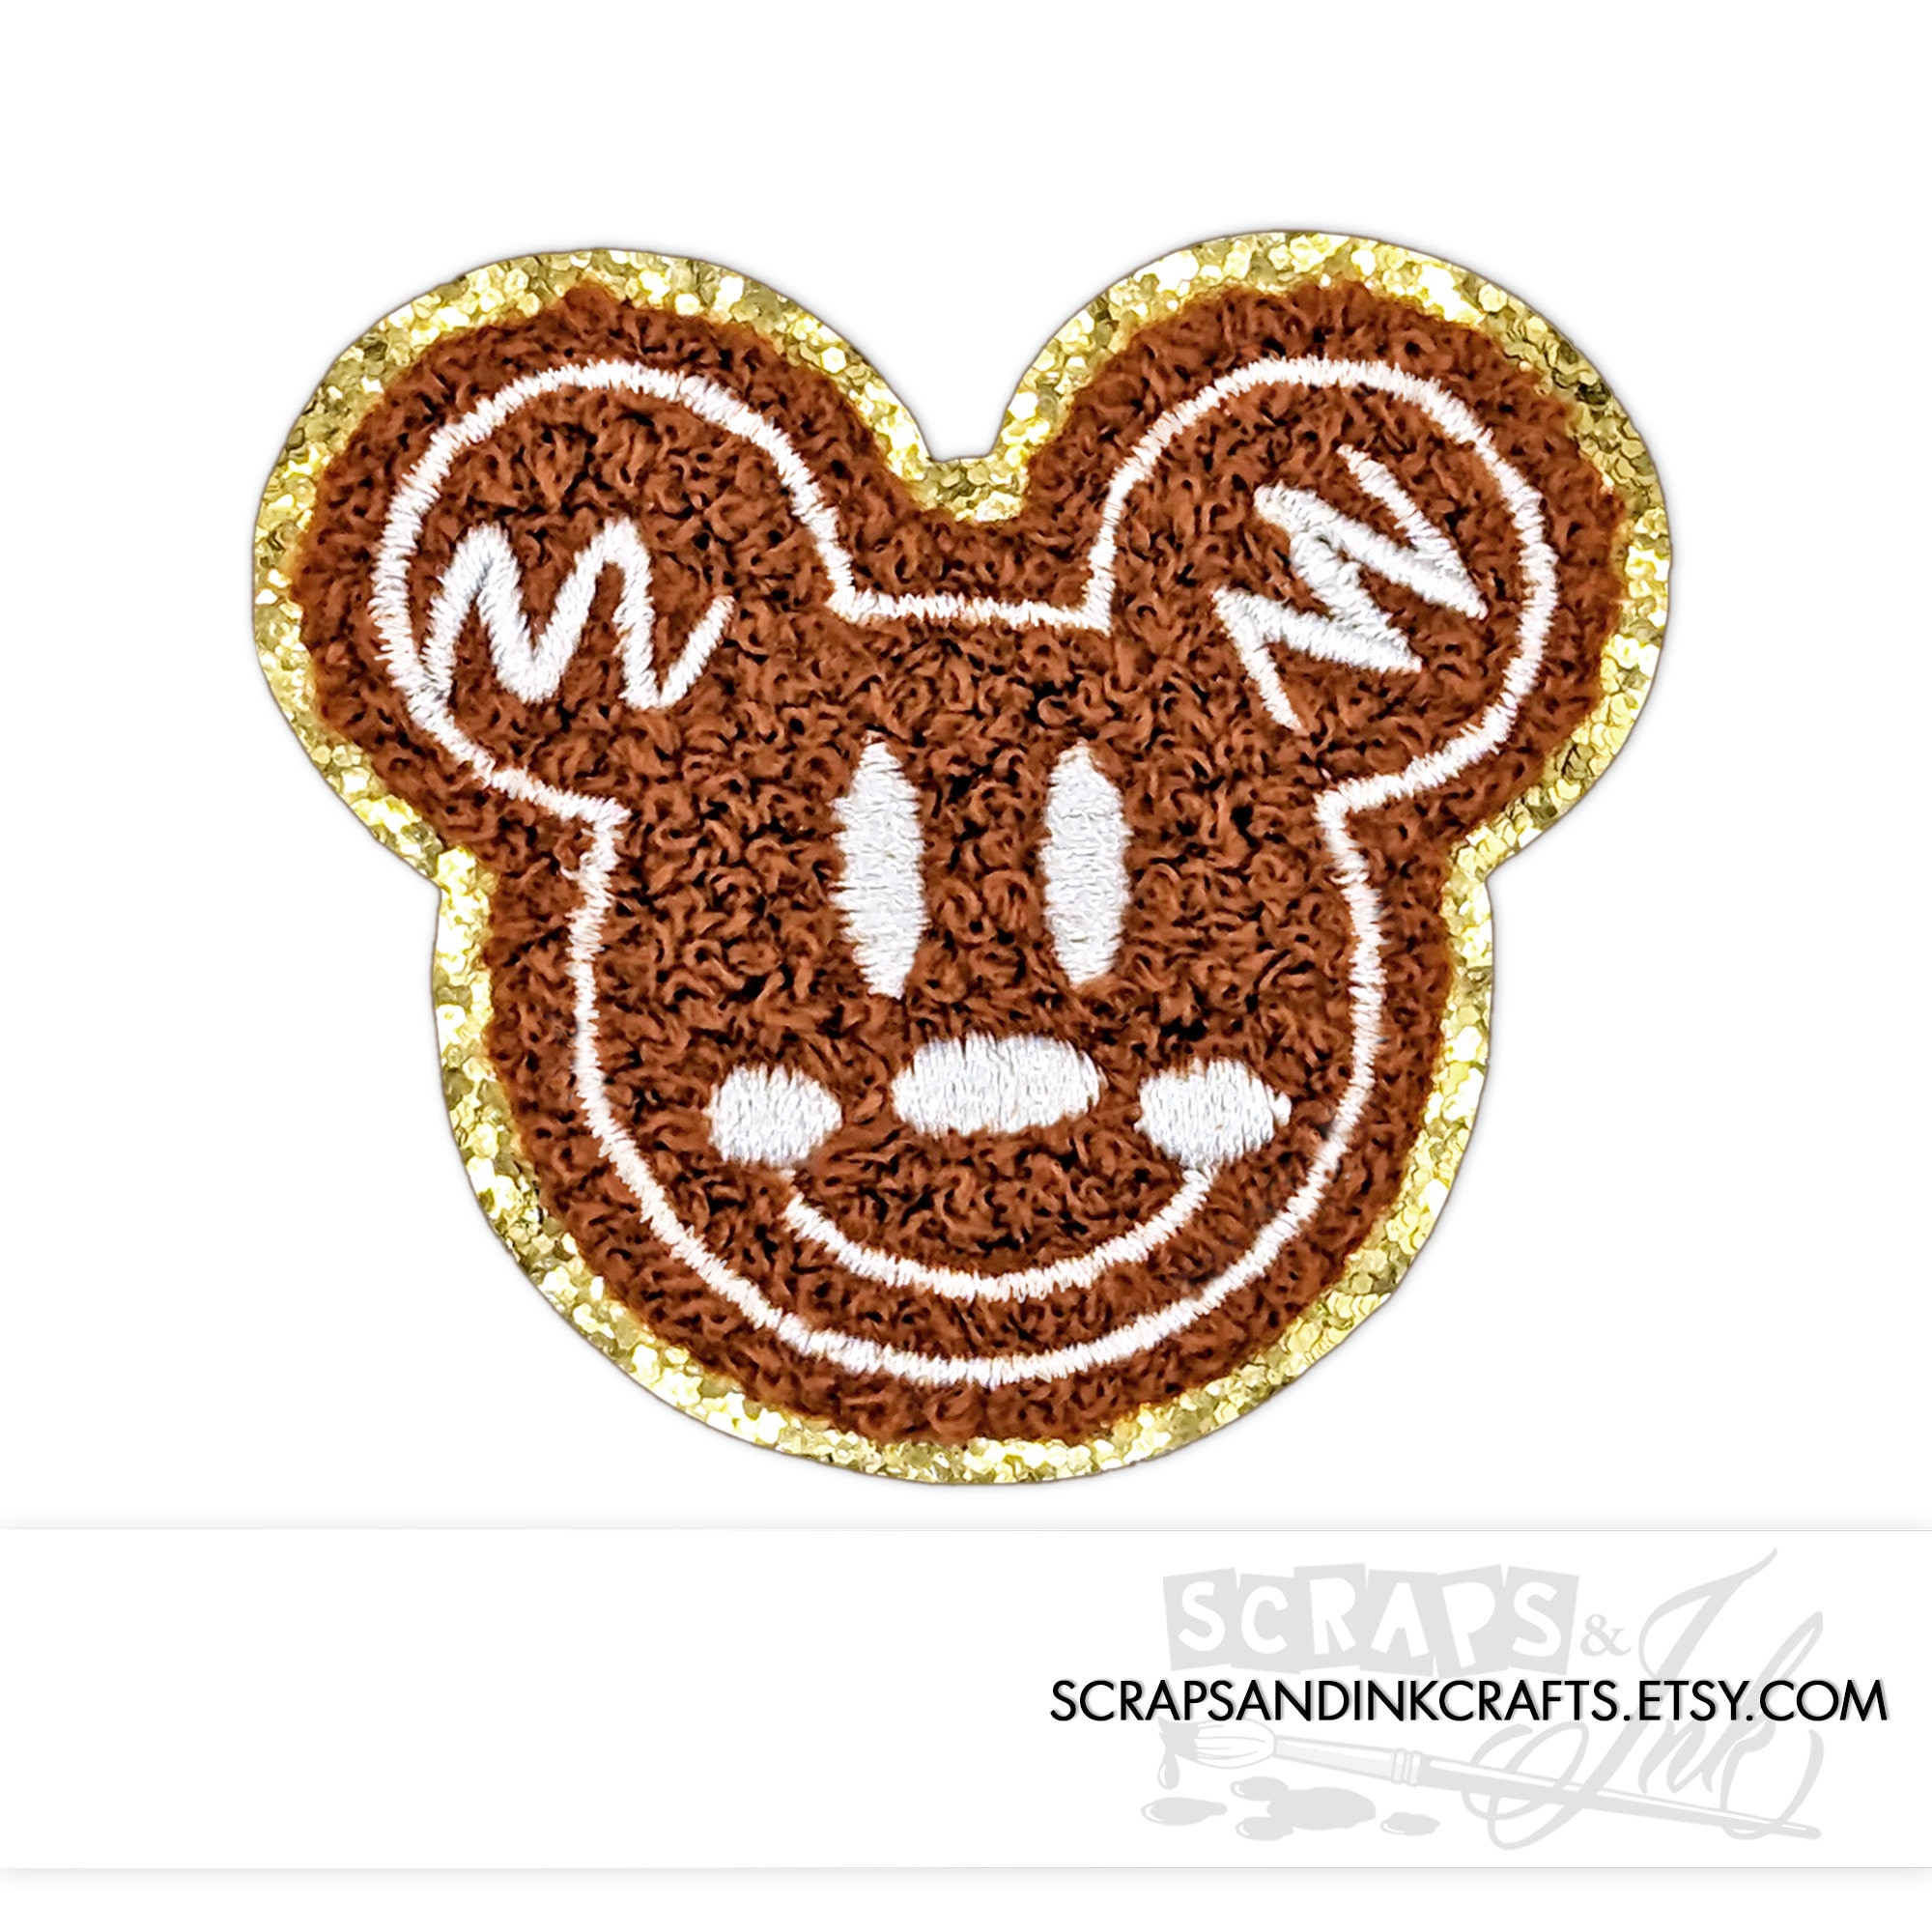  AMORNPHAN 7pcs 7 Colors Chenille Mickey Head, Mouse Head Styles  Embroidered Patches, Bright Vivid Colors, Sew On/Iron On Patch Applique for  Clothes, Dress, Hat, Jeans, DIY Accessories : Arts, Crafts 